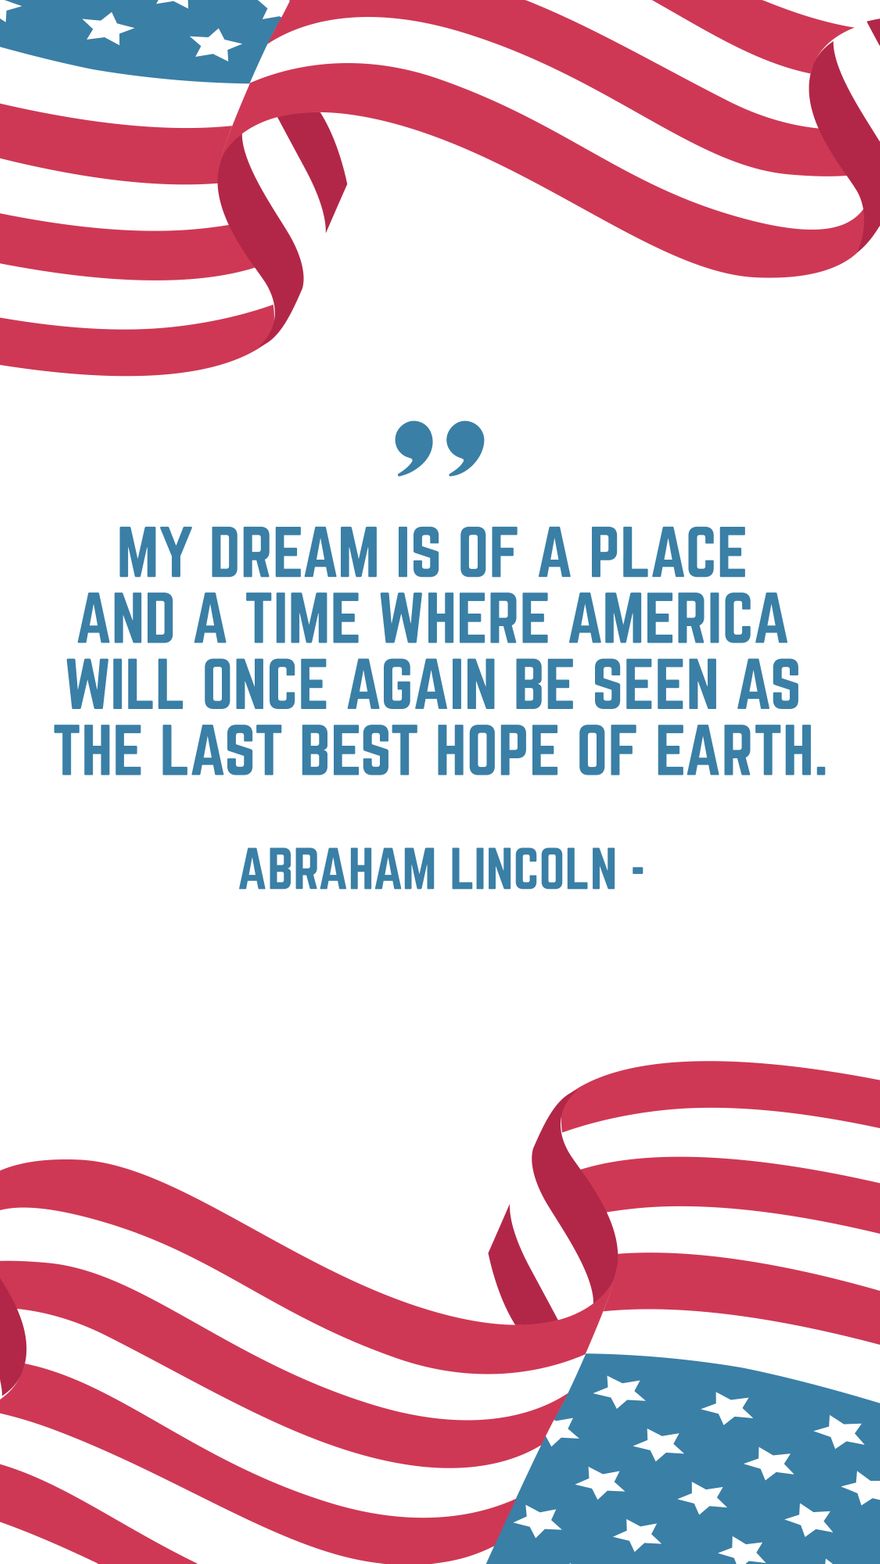 Free Abraham Lincoln - My dream is of a place and a time where America will once again be seen as the last best hope of earth. in JPG